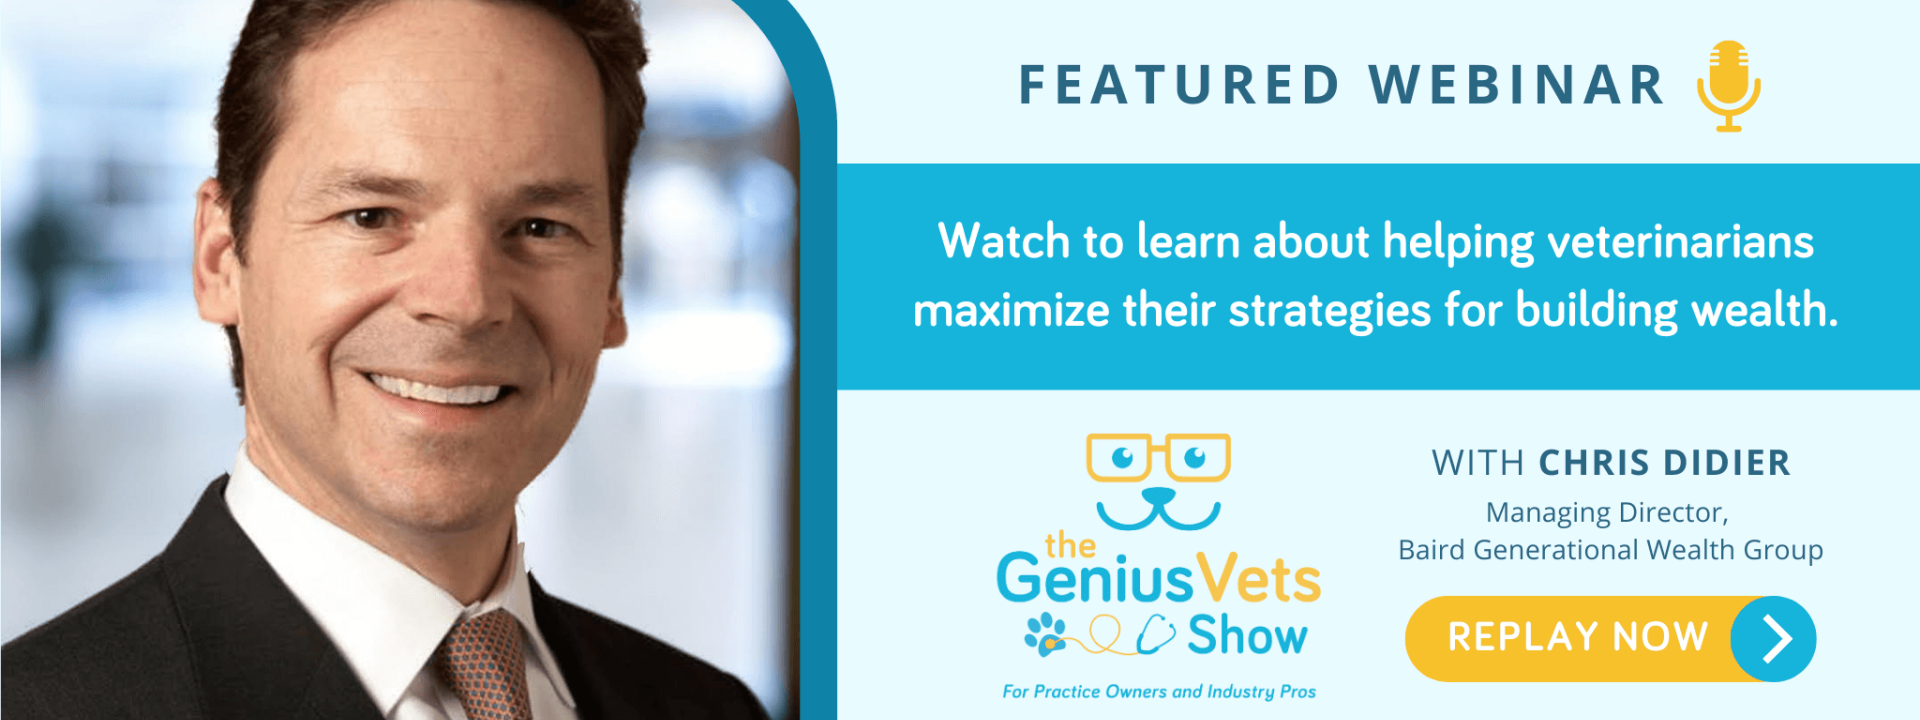 The GeniusVets Show with Chris Didier